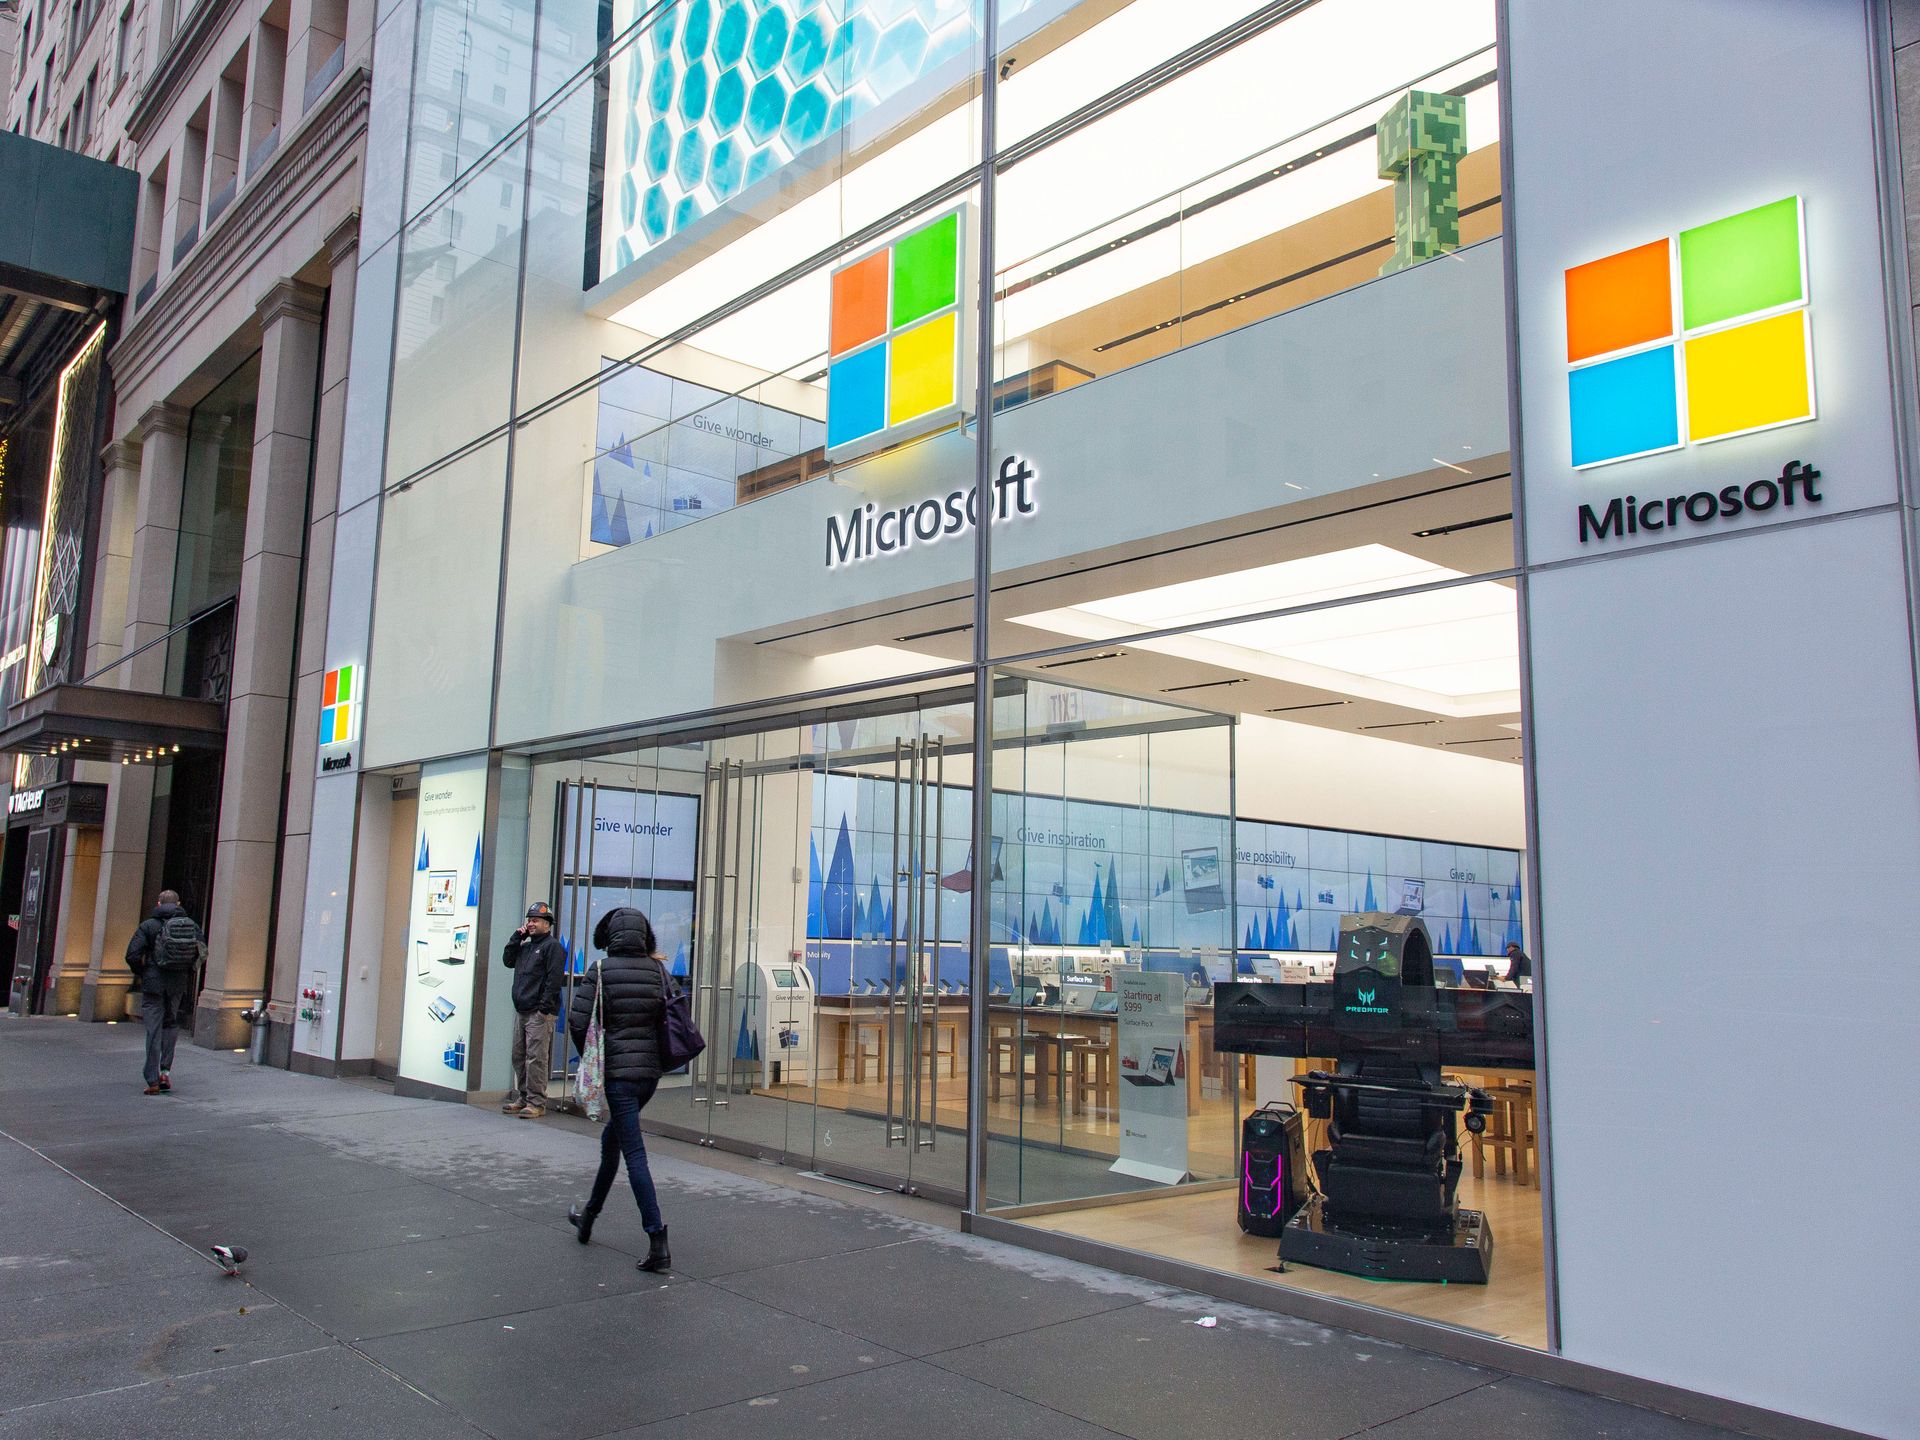 Microsoft is permanently closing its physical stores worldwide